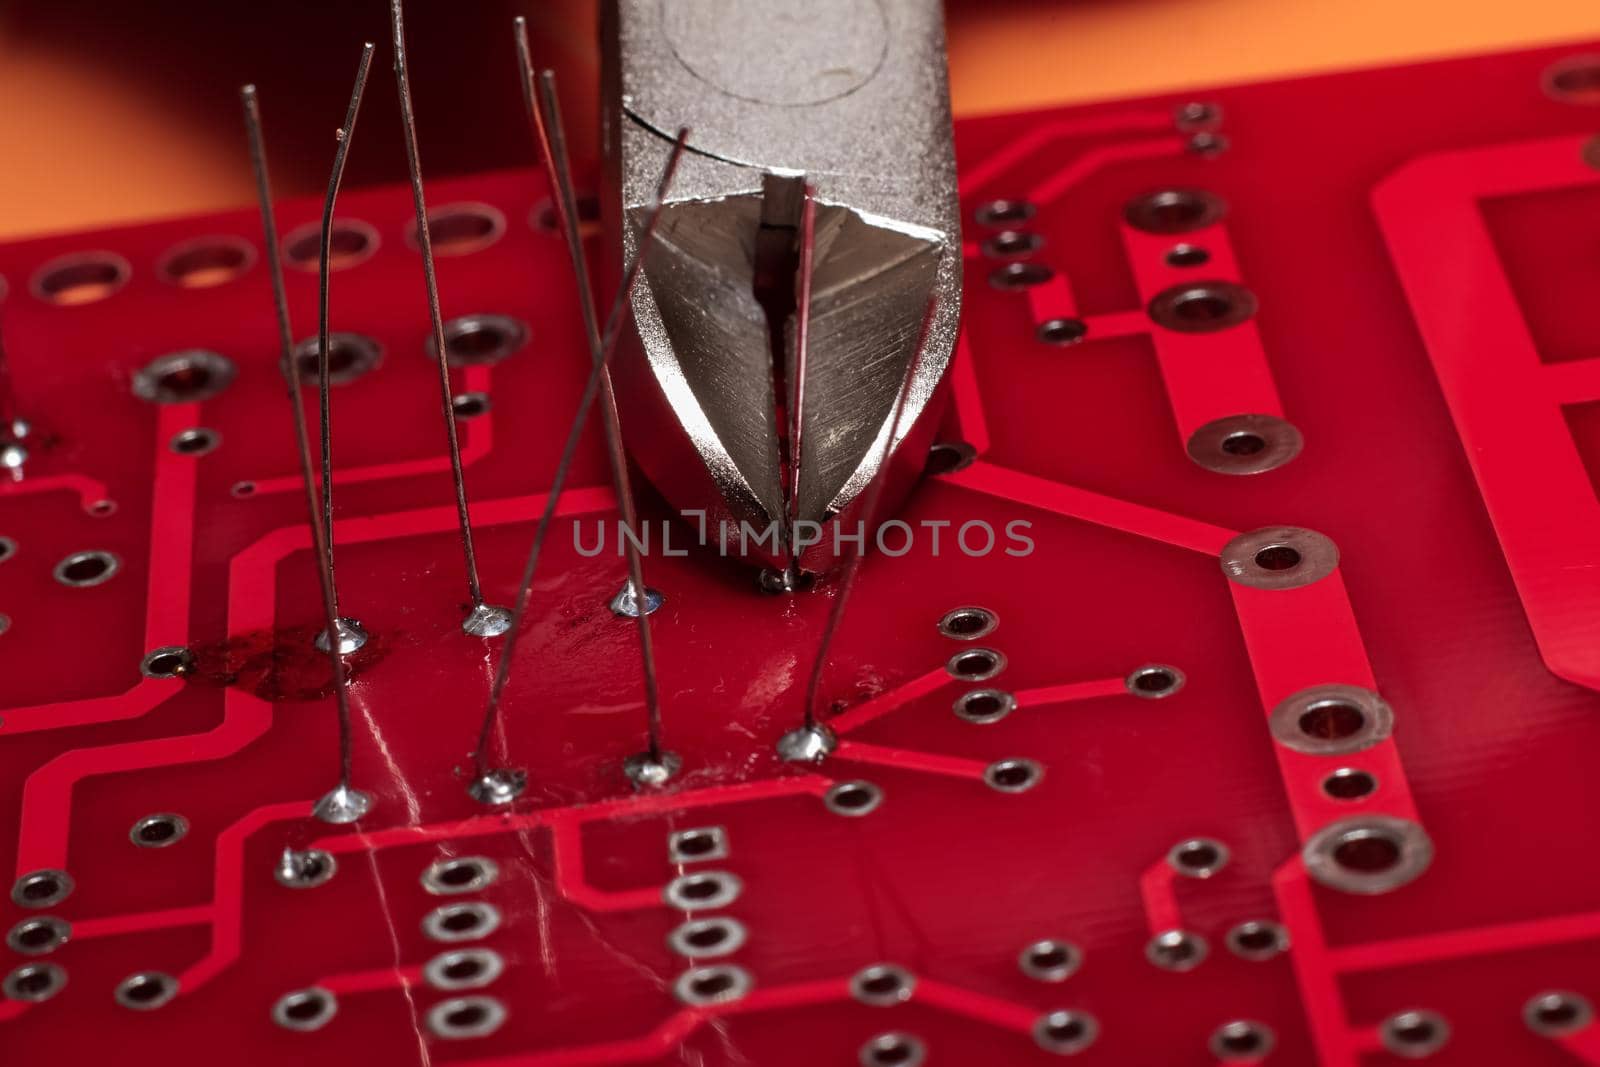 Printed circuit board with wires and wire cutters by Vera1703